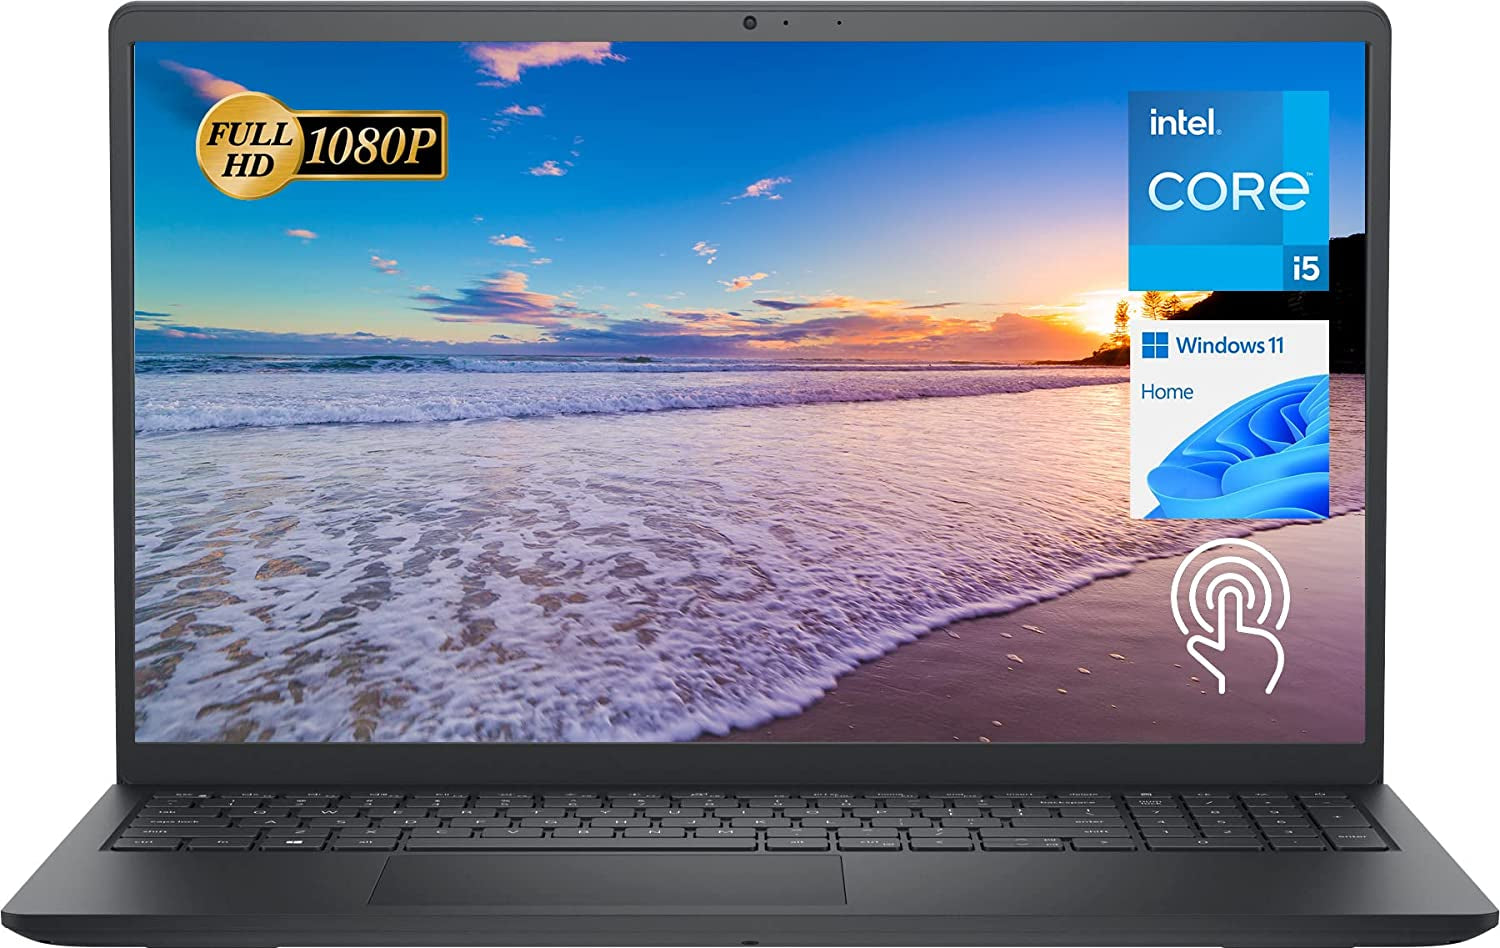 Professional title: Dell Inspiron 15 3511 Laptop with 15.6" FHD Touchscreen, Intel Core i5-1035G1, 12GB RAM, 256GB PCIe NVMe M.2 SSD, SD Card Reader, Webcam, HDMI, WiFi, Windows 11 Home - Black